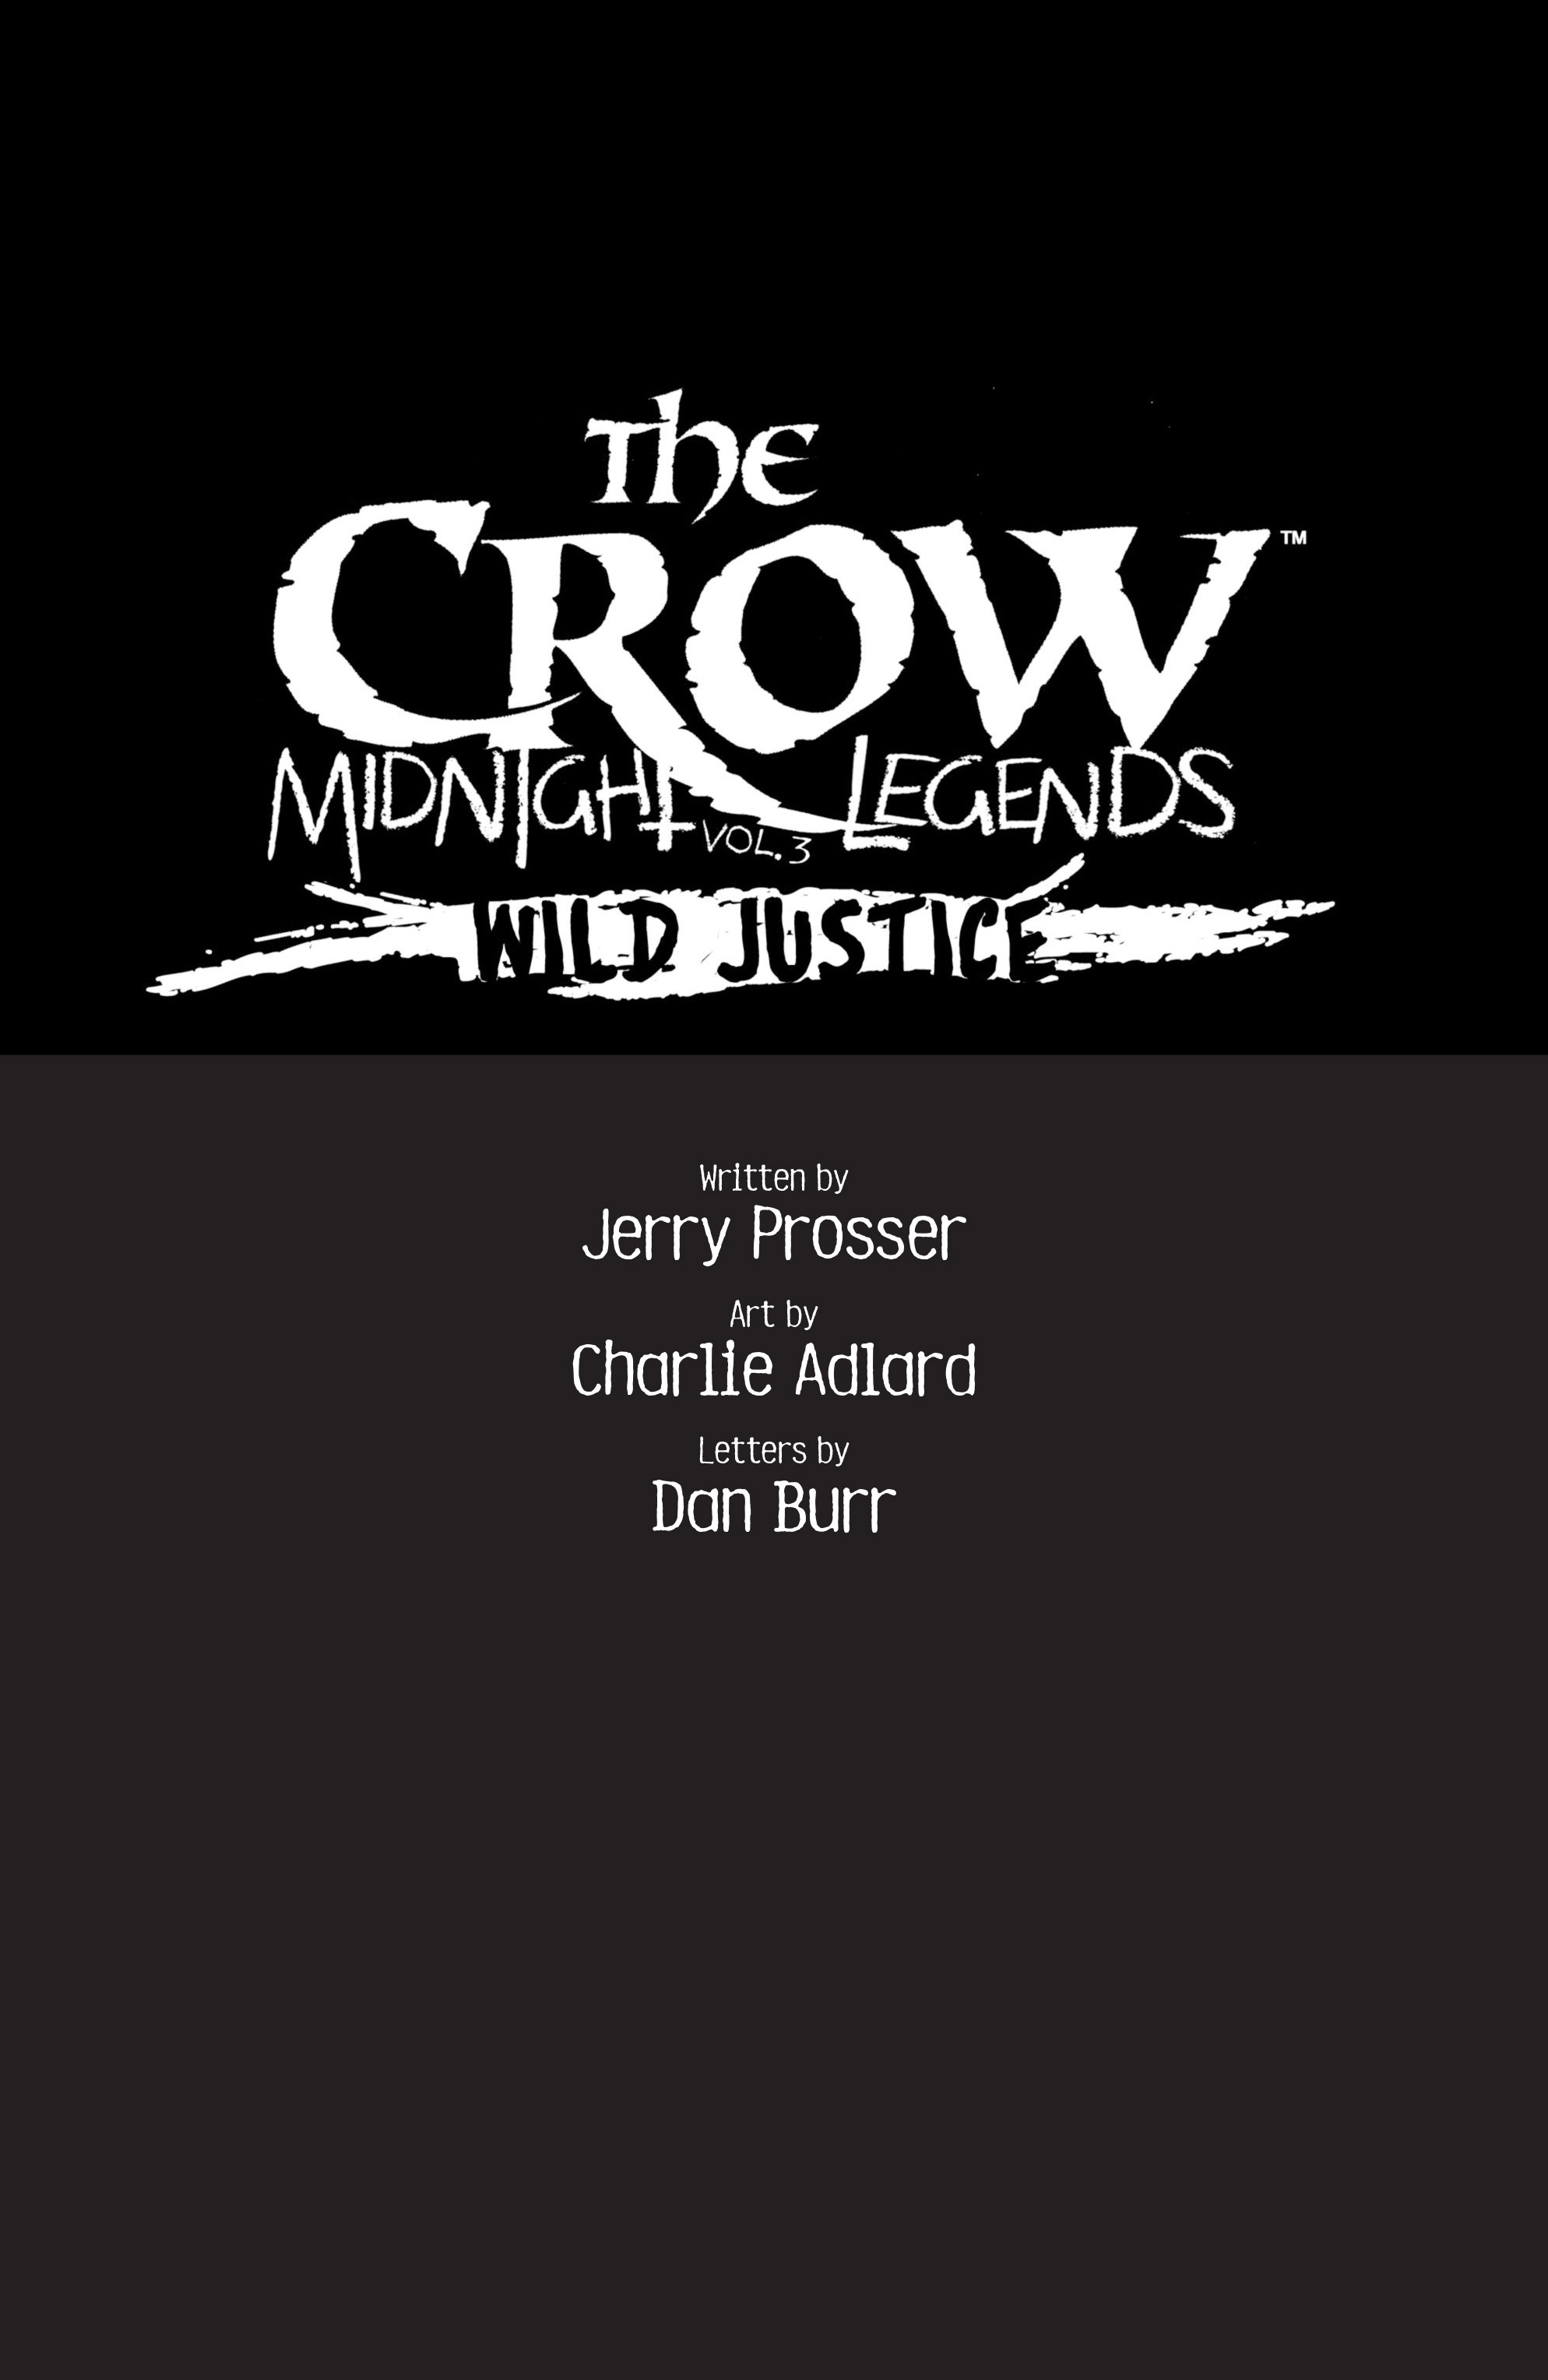 Read online The Crow Midnight Legends Vol. 3: Wild Justice comic -  Issue # TPB - 4